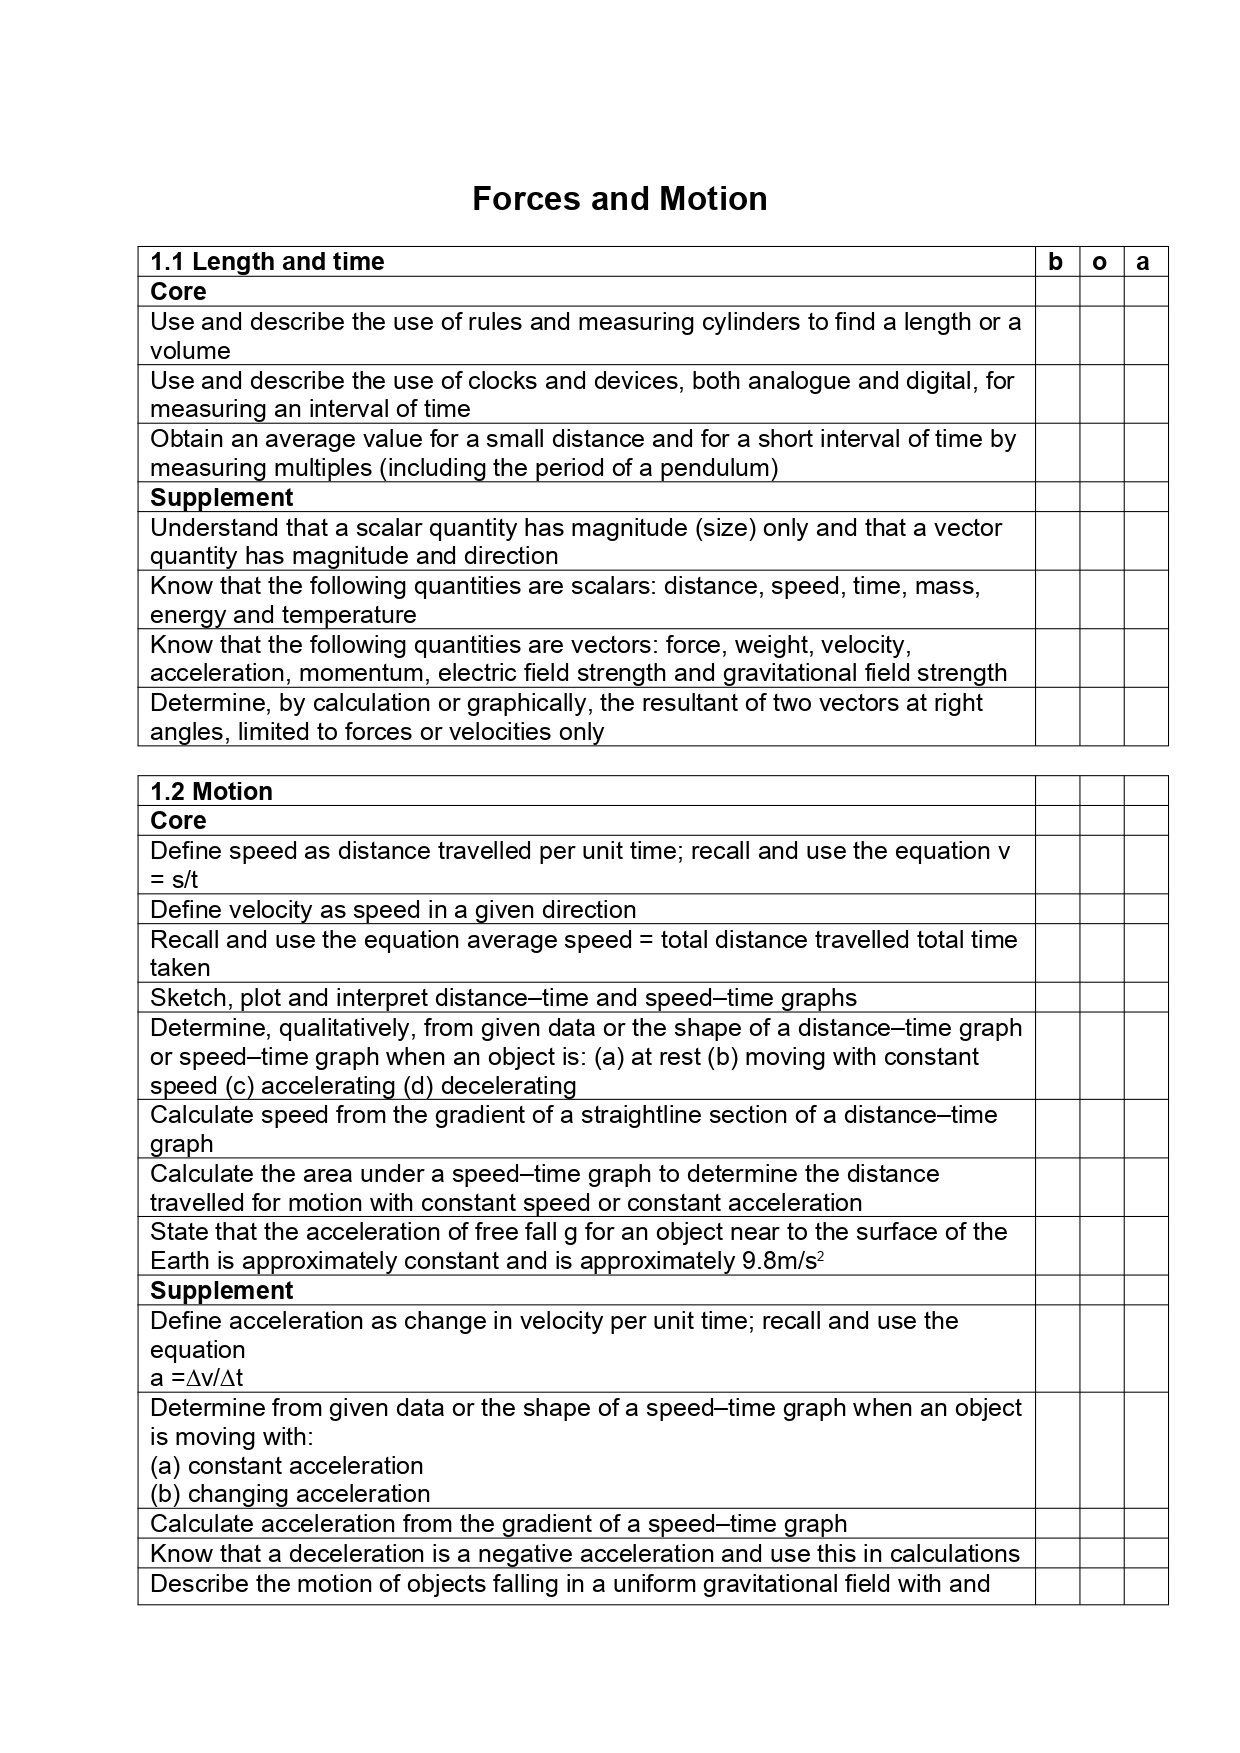 Forces and Motion Checklist_page-0001.jpg